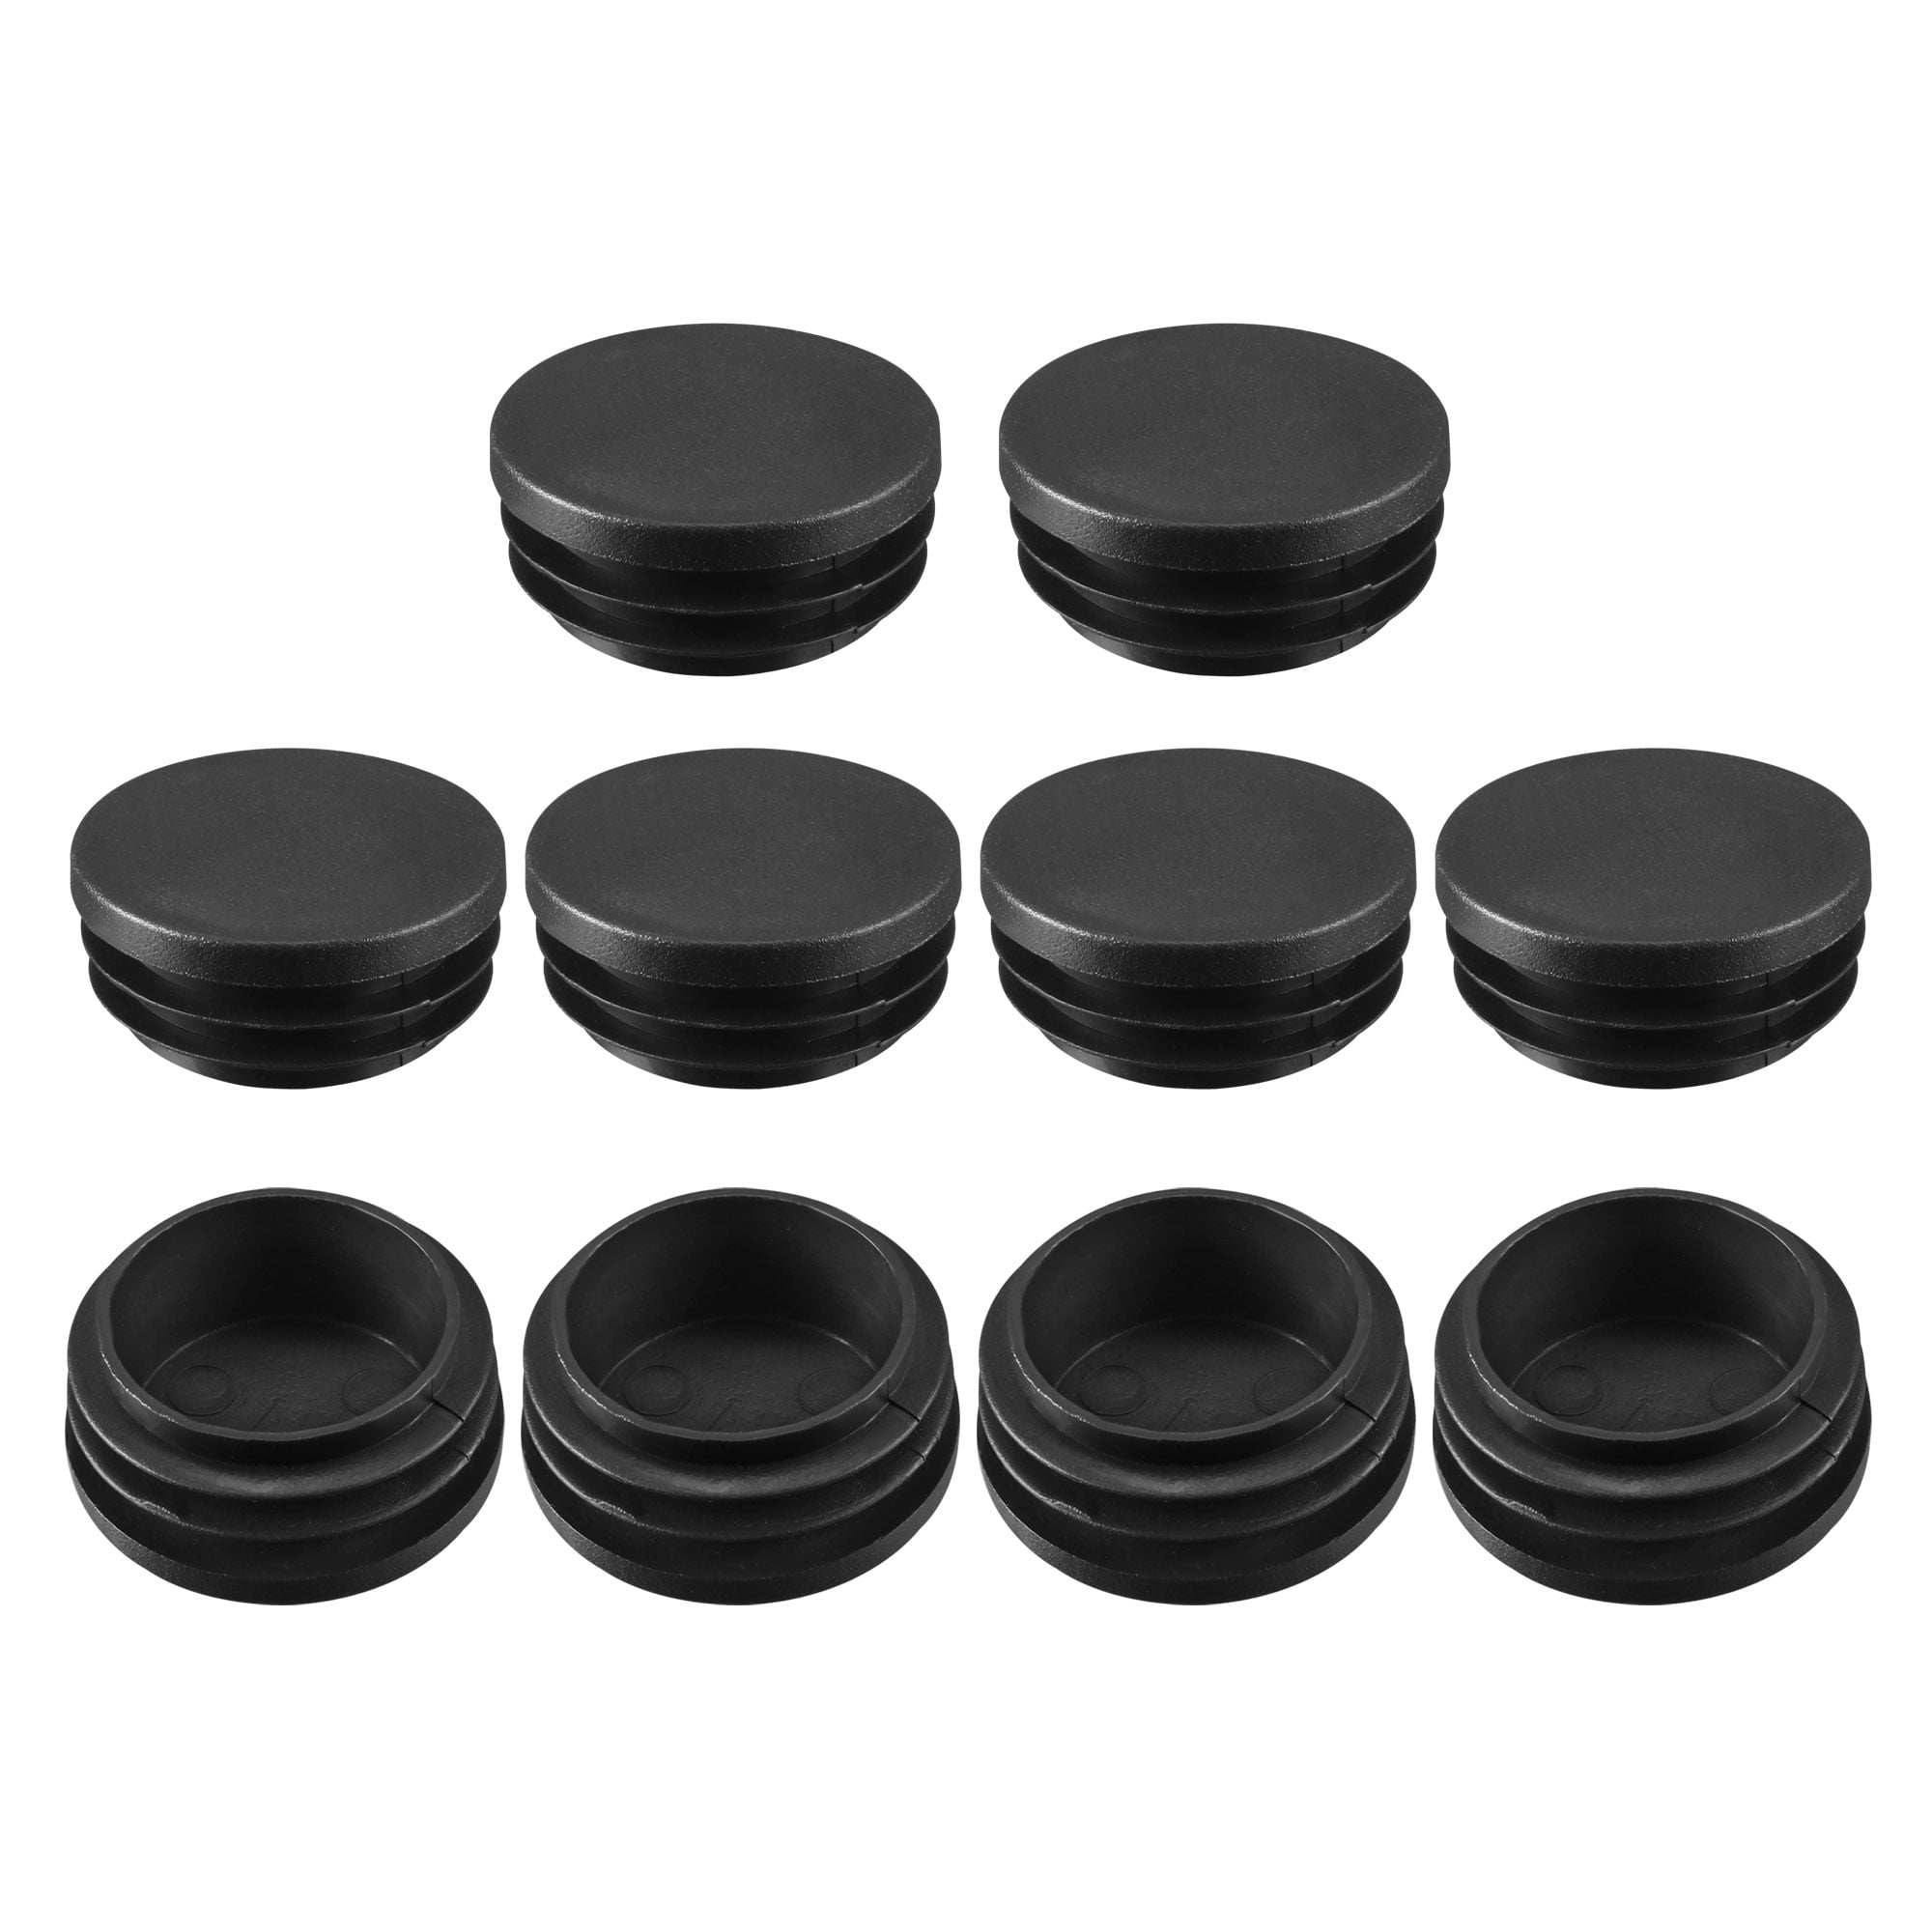 End Caps *Value Pack* Tube Bungs 100 x 7/8" Inch Square Chair Feet 